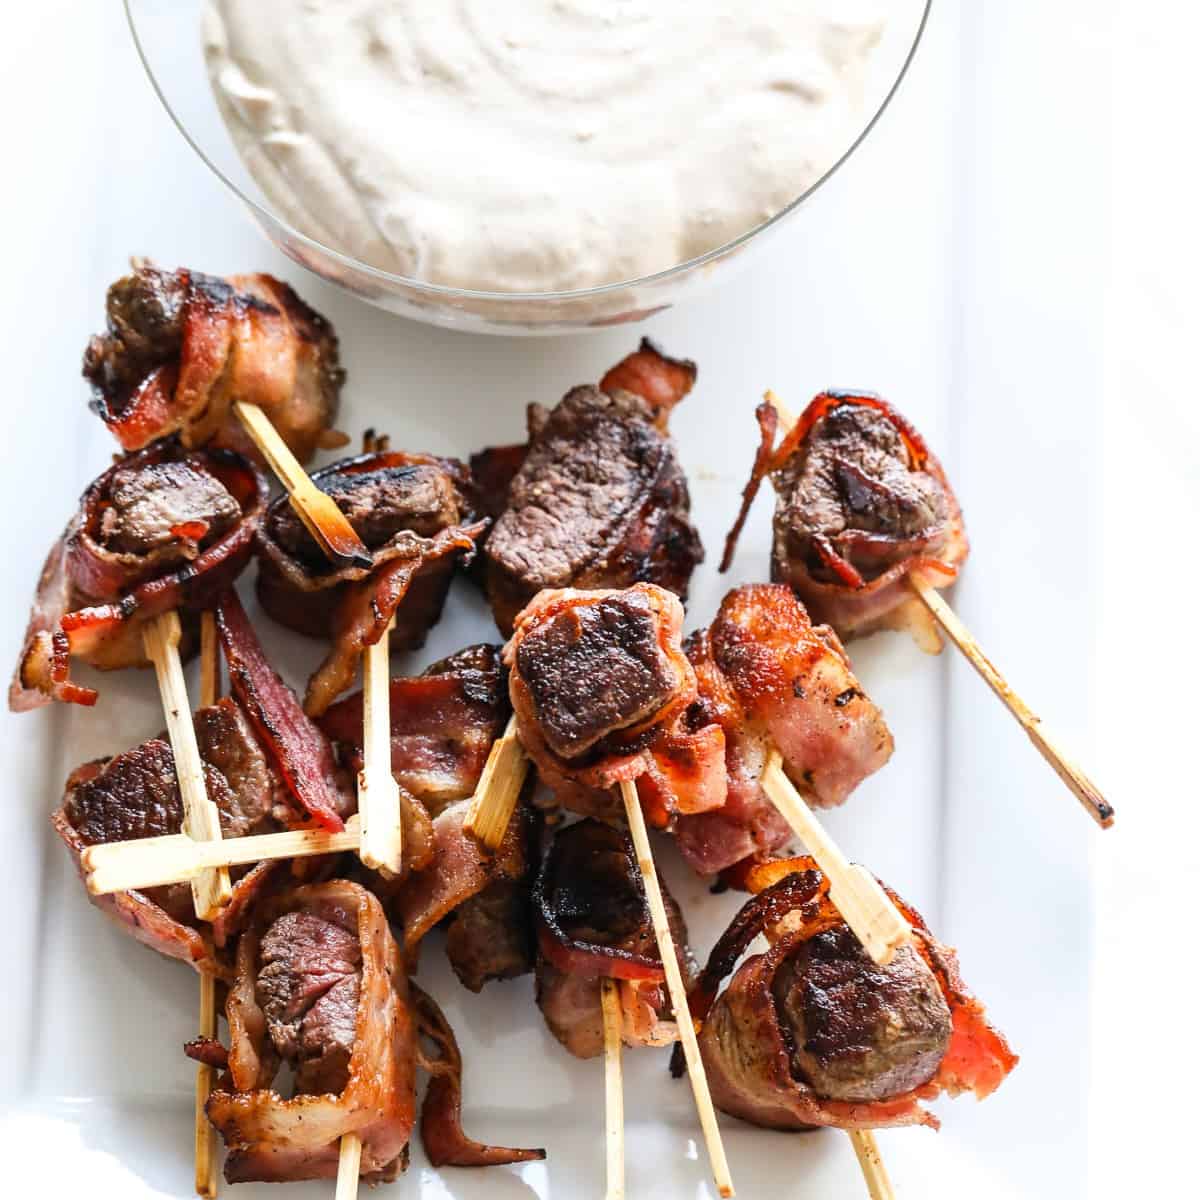 A glass bowl filled with horseradish dipping sauce with bacon wrapped filet mignon appetizers on toothpicks.